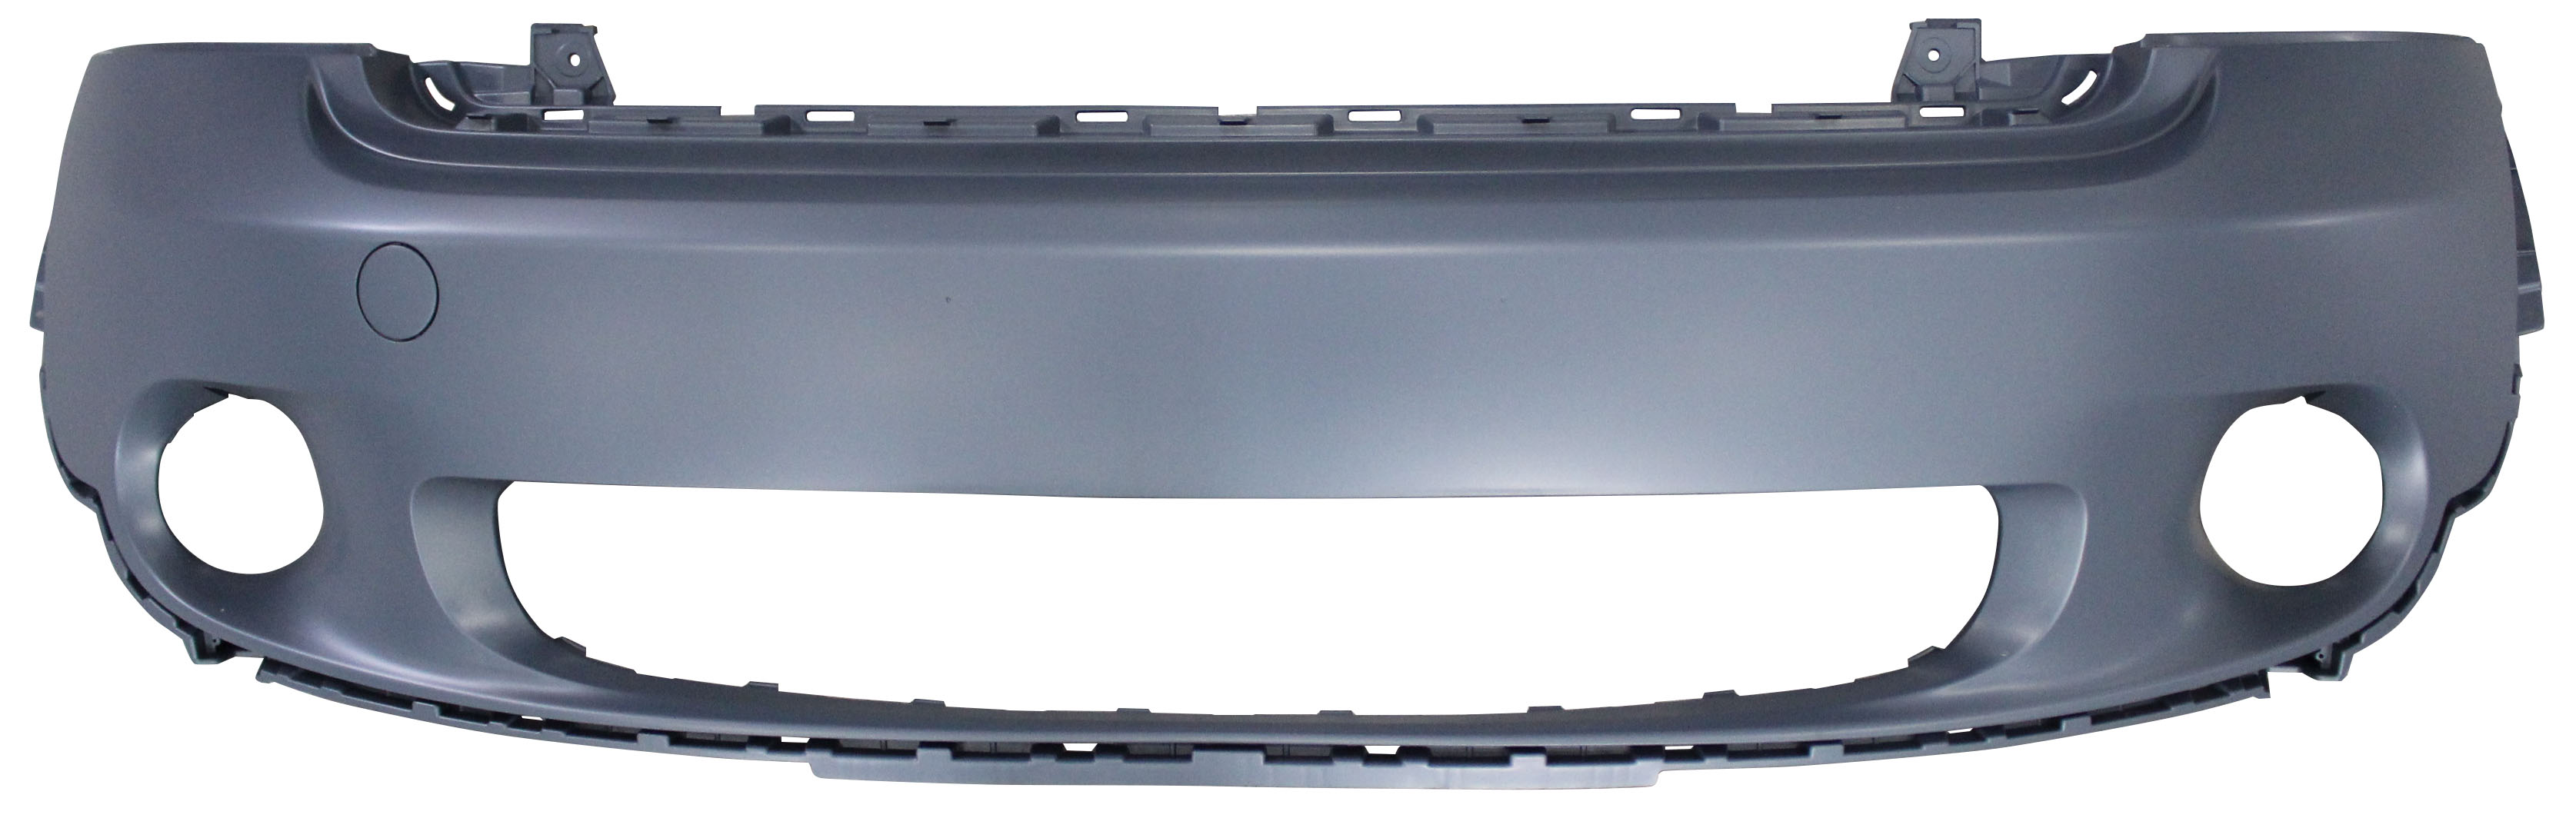 Aftermarket BUMPER COVERS for MINI - COOPER PACEMAN, COOPER PACEMAN,13-16,Front bumper cover